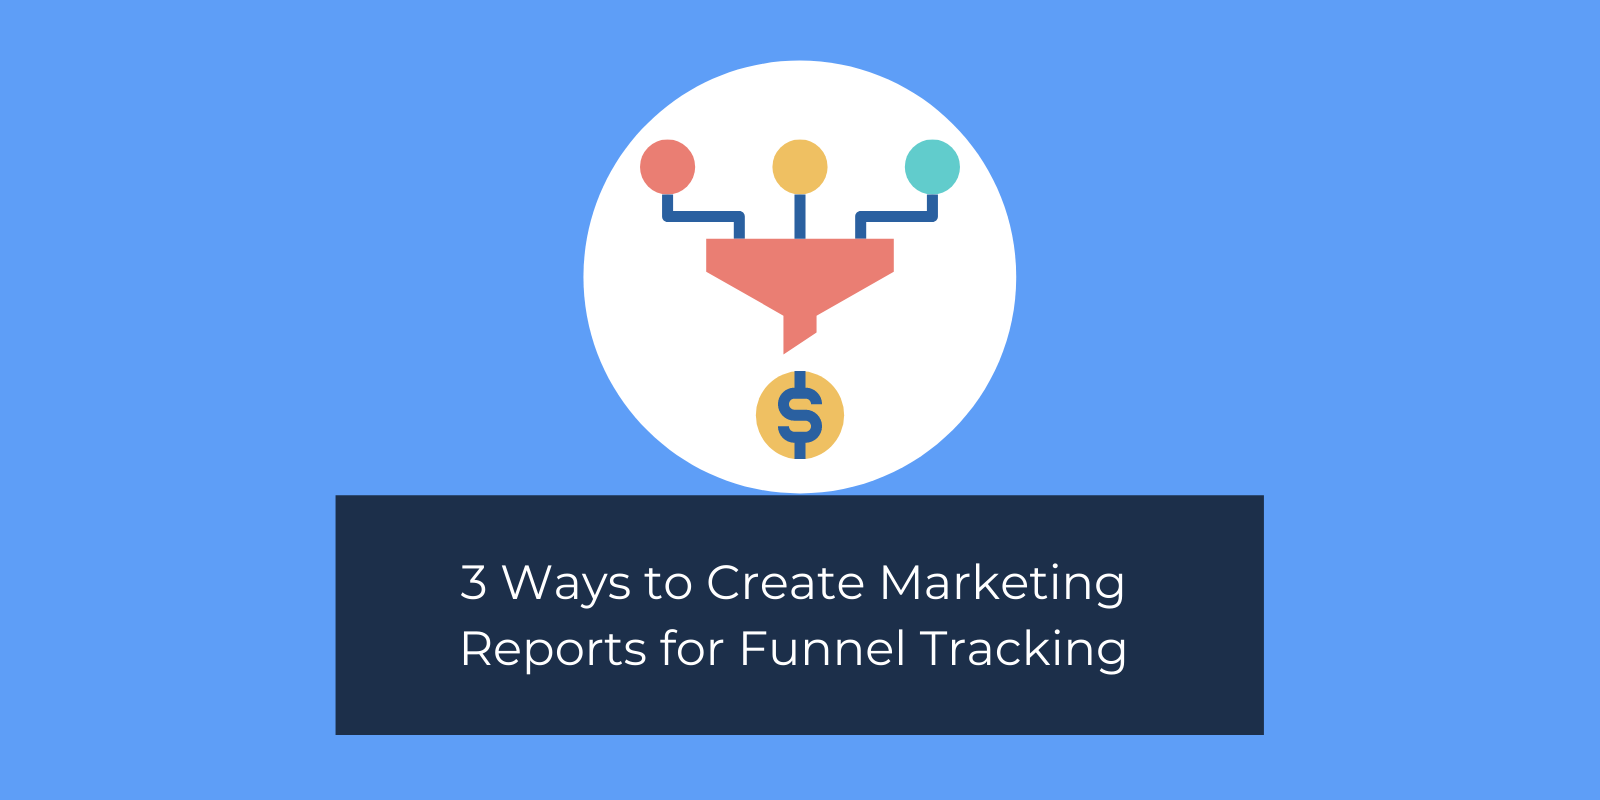 3 Ways to Create Marketing Reports for Funnel Tracking